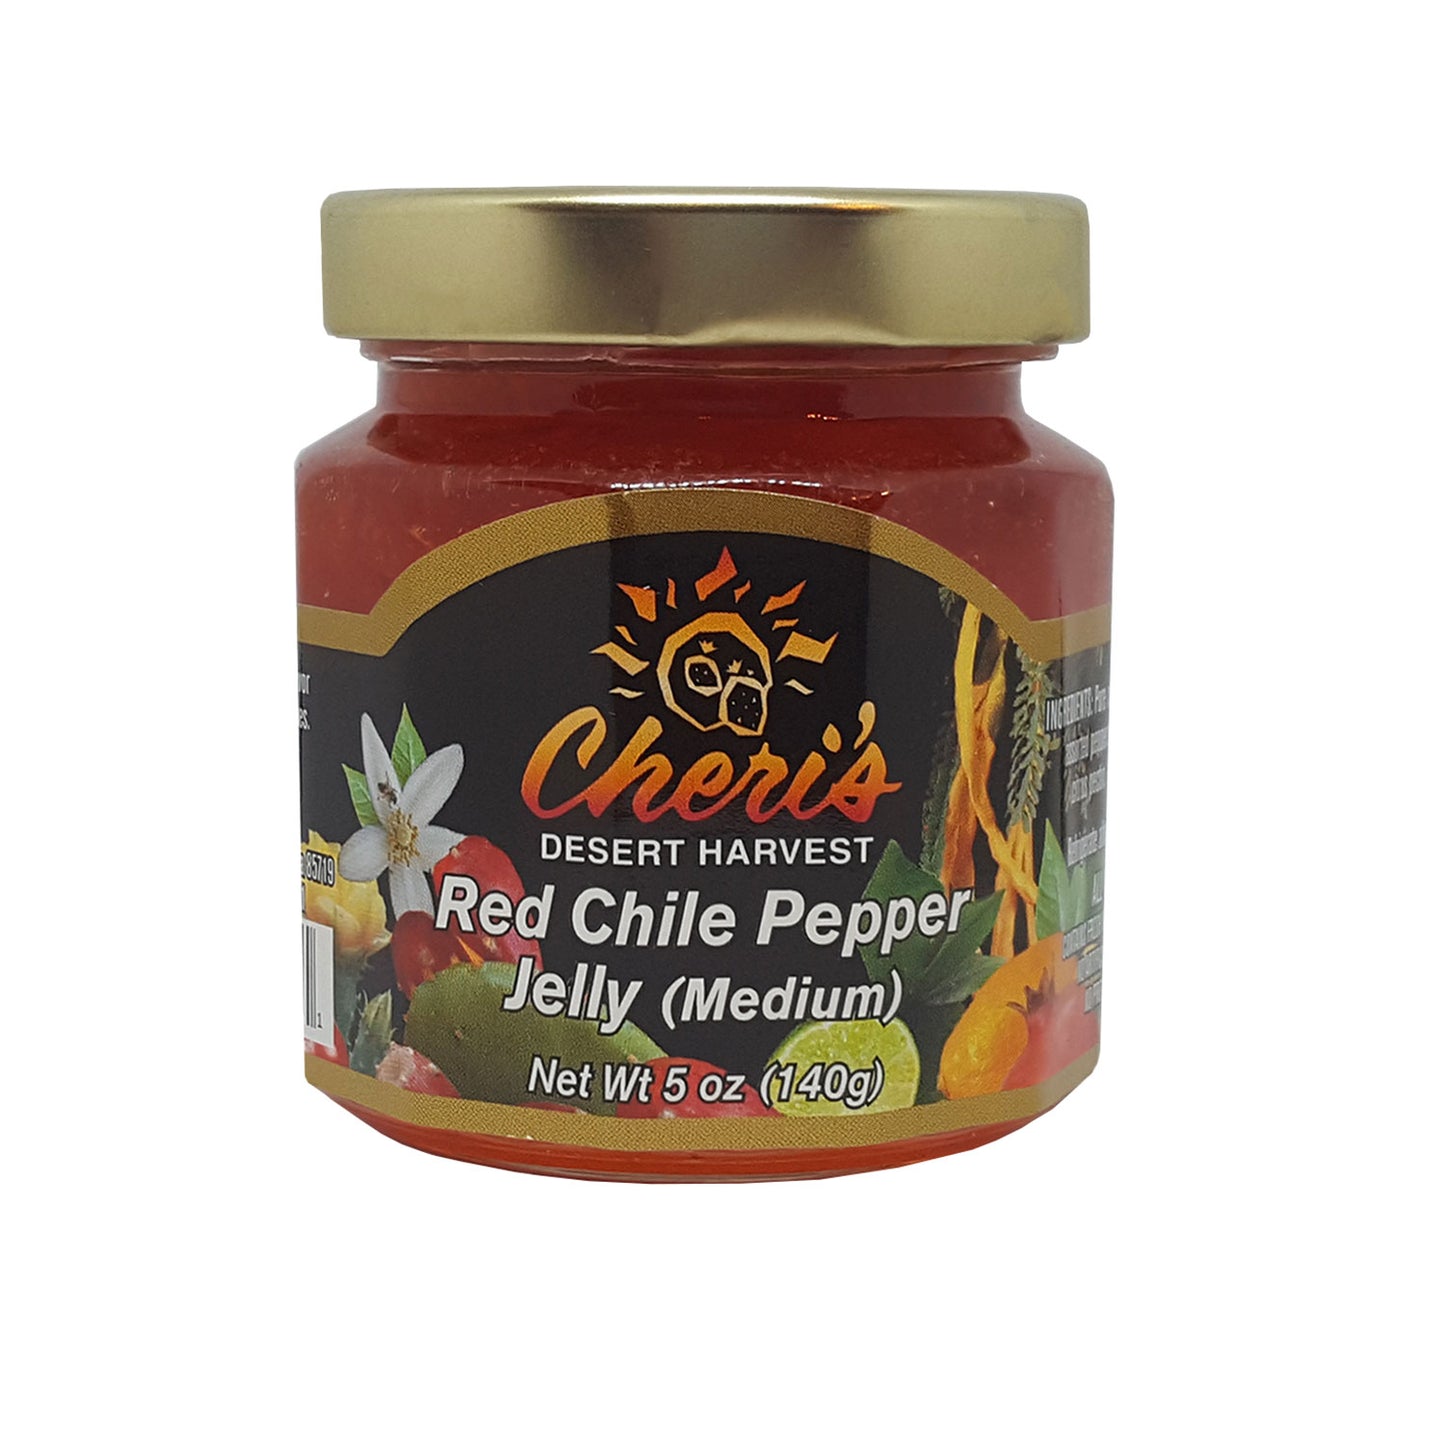 Red Chile Pepper Jelly